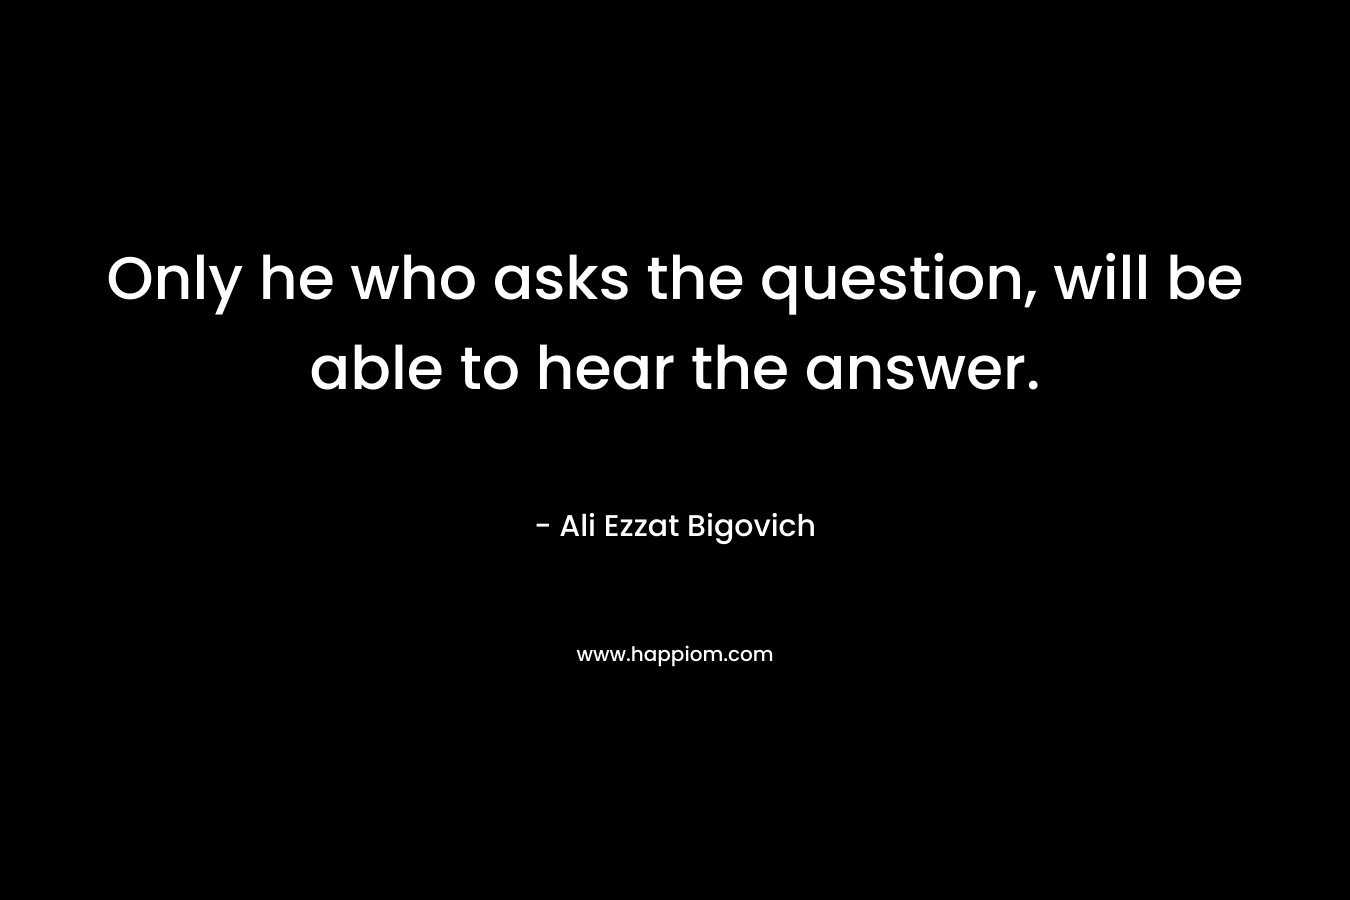 Only he who asks the question, will be able to hear the answer.